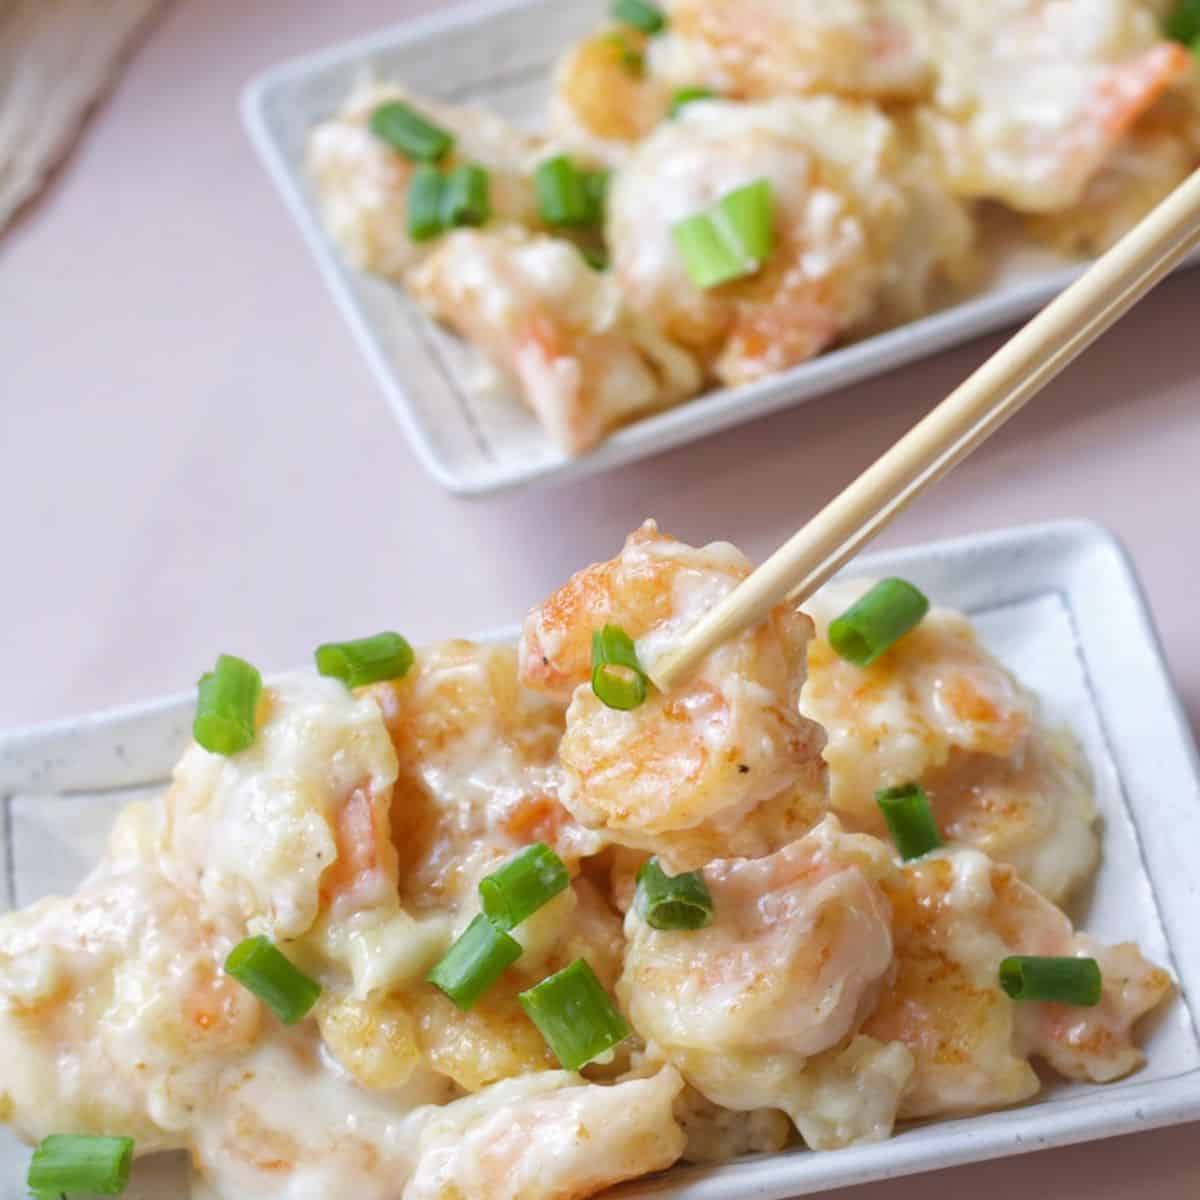 What to serve with Cream Of Coconut Shrimp?